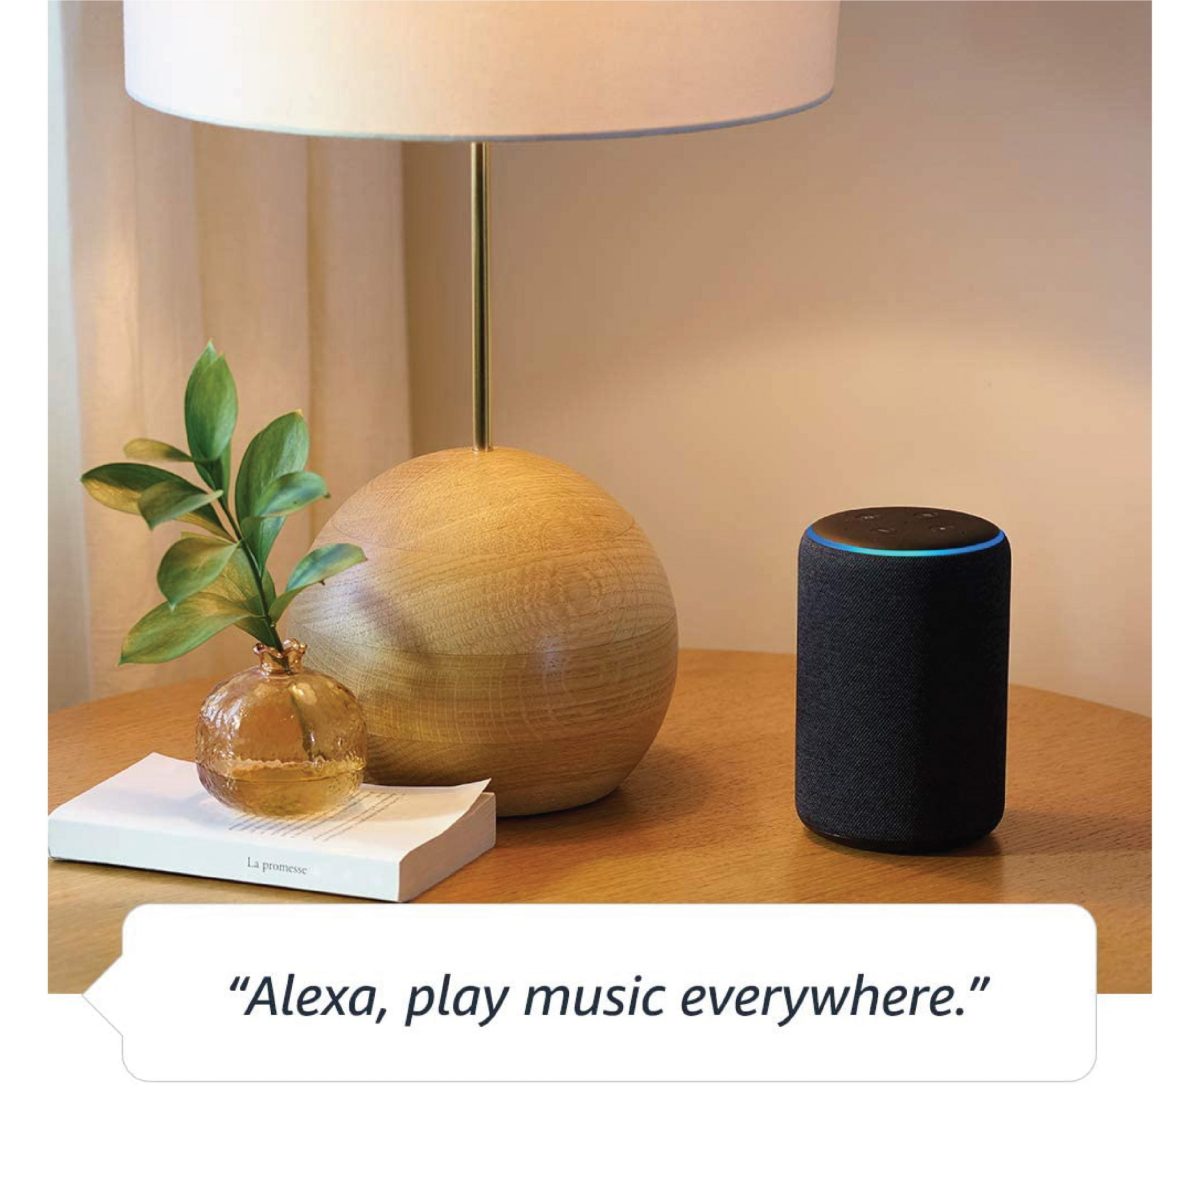 Adasd2X 03 Scaled Amazon Echo Plus Connects To Alexa And Can Simply Set Up And Voice-Control Compatible Smart Home Devices. Play Music Powered By Dolby From Your Favourite Streaming Services. Just Ask Alexa To Play Music, Read The News, Check Weather Forecasts, Set Alarms And Timers, Control Smart Home Devices, Call Echo Devices, And More. Alexa Is Always Getting Smarter And Adding New Features And Skills. &Lt;Ul&Gt; &Lt;Li&Gt;1 Internal Speaker.&Lt;/Li&Gt; &Lt;Li&Gt;3.5Mm Aux In.&Lt;/Li&Gt; &Lt;Li&Gt;2 Amplifier Channels.&Lt;/Li&Gt; &Lt;Li&Gt;Frequency 70Hz-20000Hz.&Lt;/Li&Gt; &Lt;Li&Gt;Size H14.85, W9.92, D9.92Cm.&Lt;/Li&Gt; &Lt;/Ul&Gt; [Video Width=&Quot;1024&Quot; Height=&Quot;576&Quot; Mp4=&Quot;Https://Lablaab.com/Wp-Content/Uploads/2020/04/9734Eb70-3880-47D1-9F7F-7958Db9F4054.Mp4&Quot;][/Video] Echo Plus Echo Plus (2Nd Gen) - Premium Sound With Built In Smart Home Hub - Sand Stone